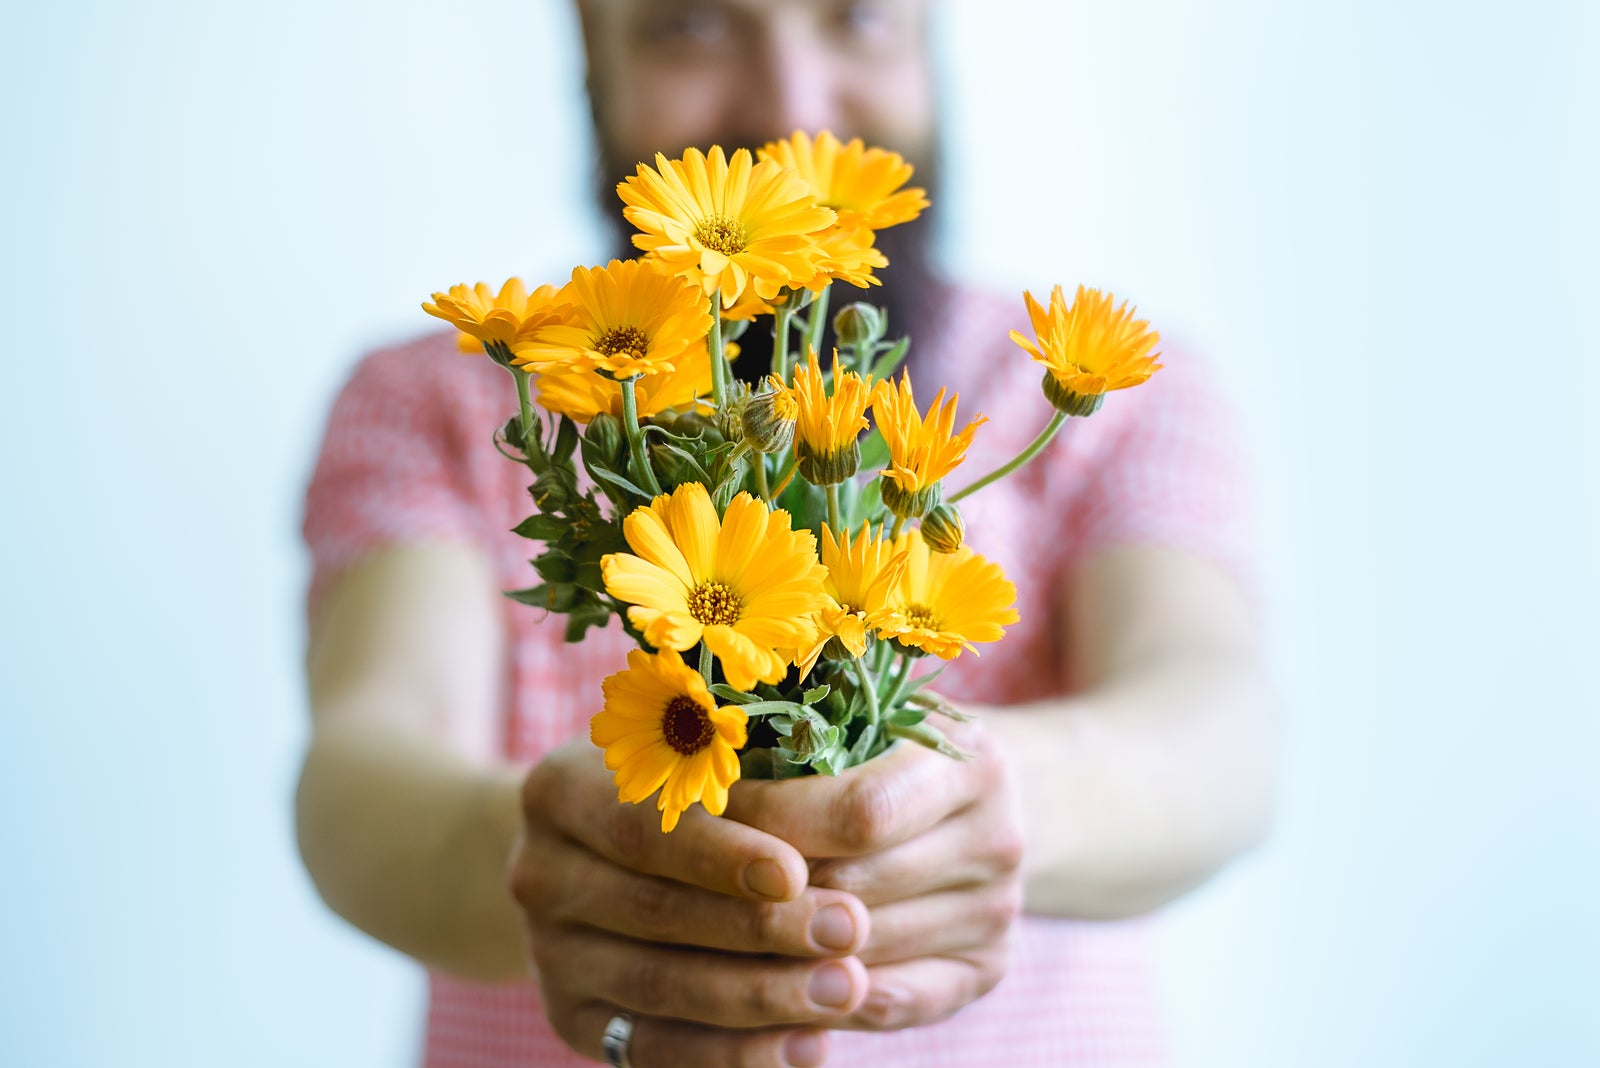 Man holding bouquet of flowers. Man holding yellow flowers. Flowers for postcard and home decoration. Beautiful flowers. Colorful flowers. Flowers home decor. Flower background. flower bouquet close up. Man giving flowers for wedding.